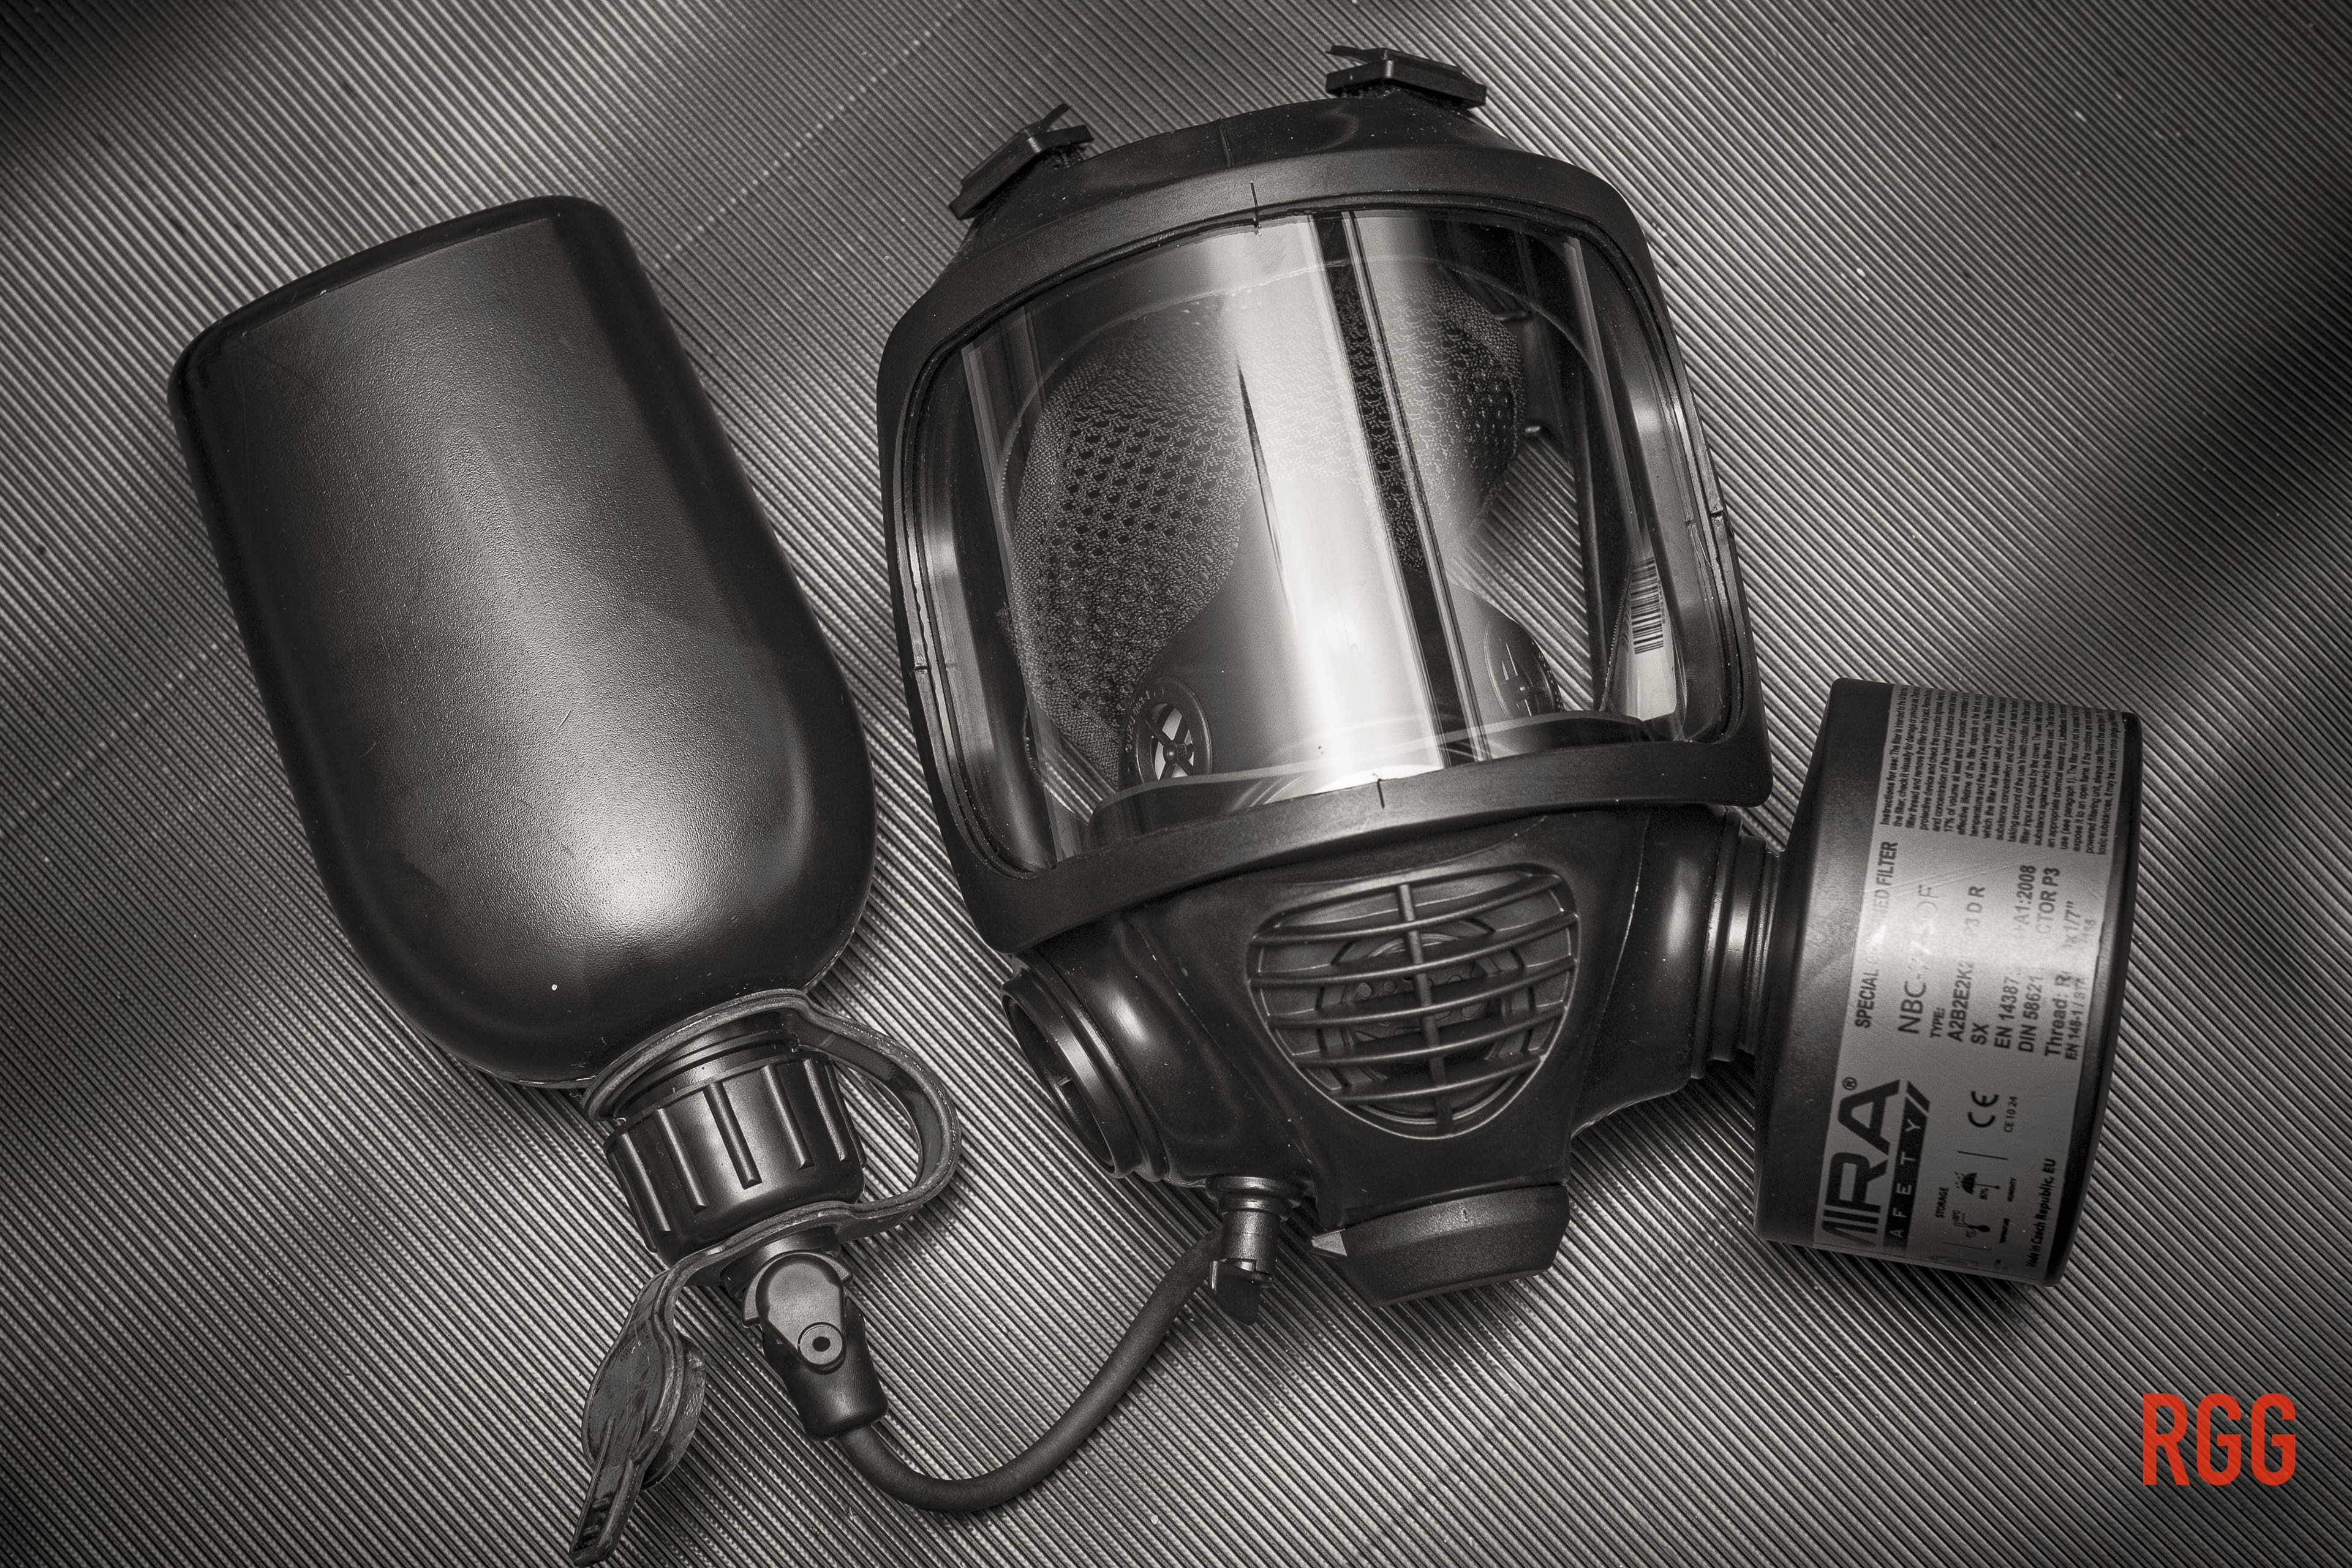 The MIRA Safety CM-6M Gas Mask and the included secure canteen.